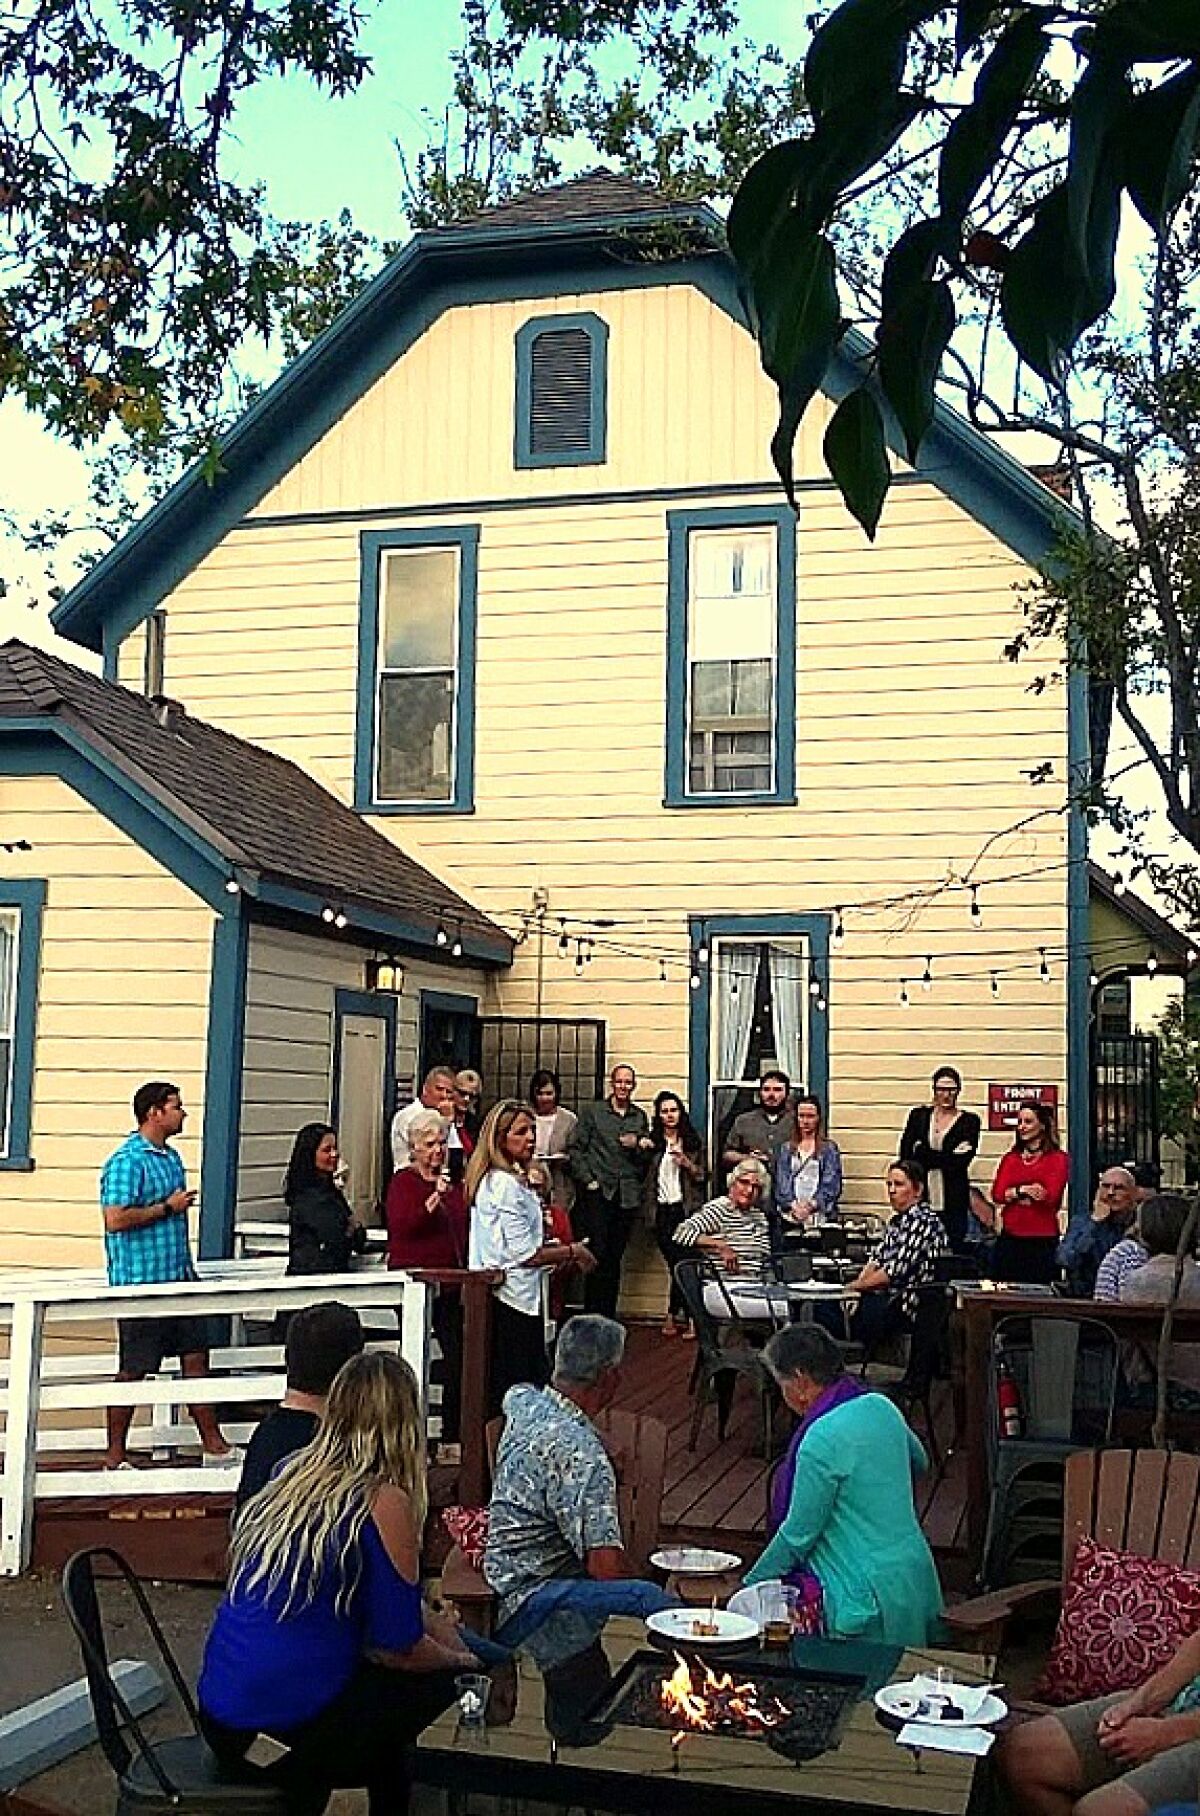 Cathy Gallagher (in white sweater) discusses the history of the Jennings House on the back porch of her Jennings House Cafe.